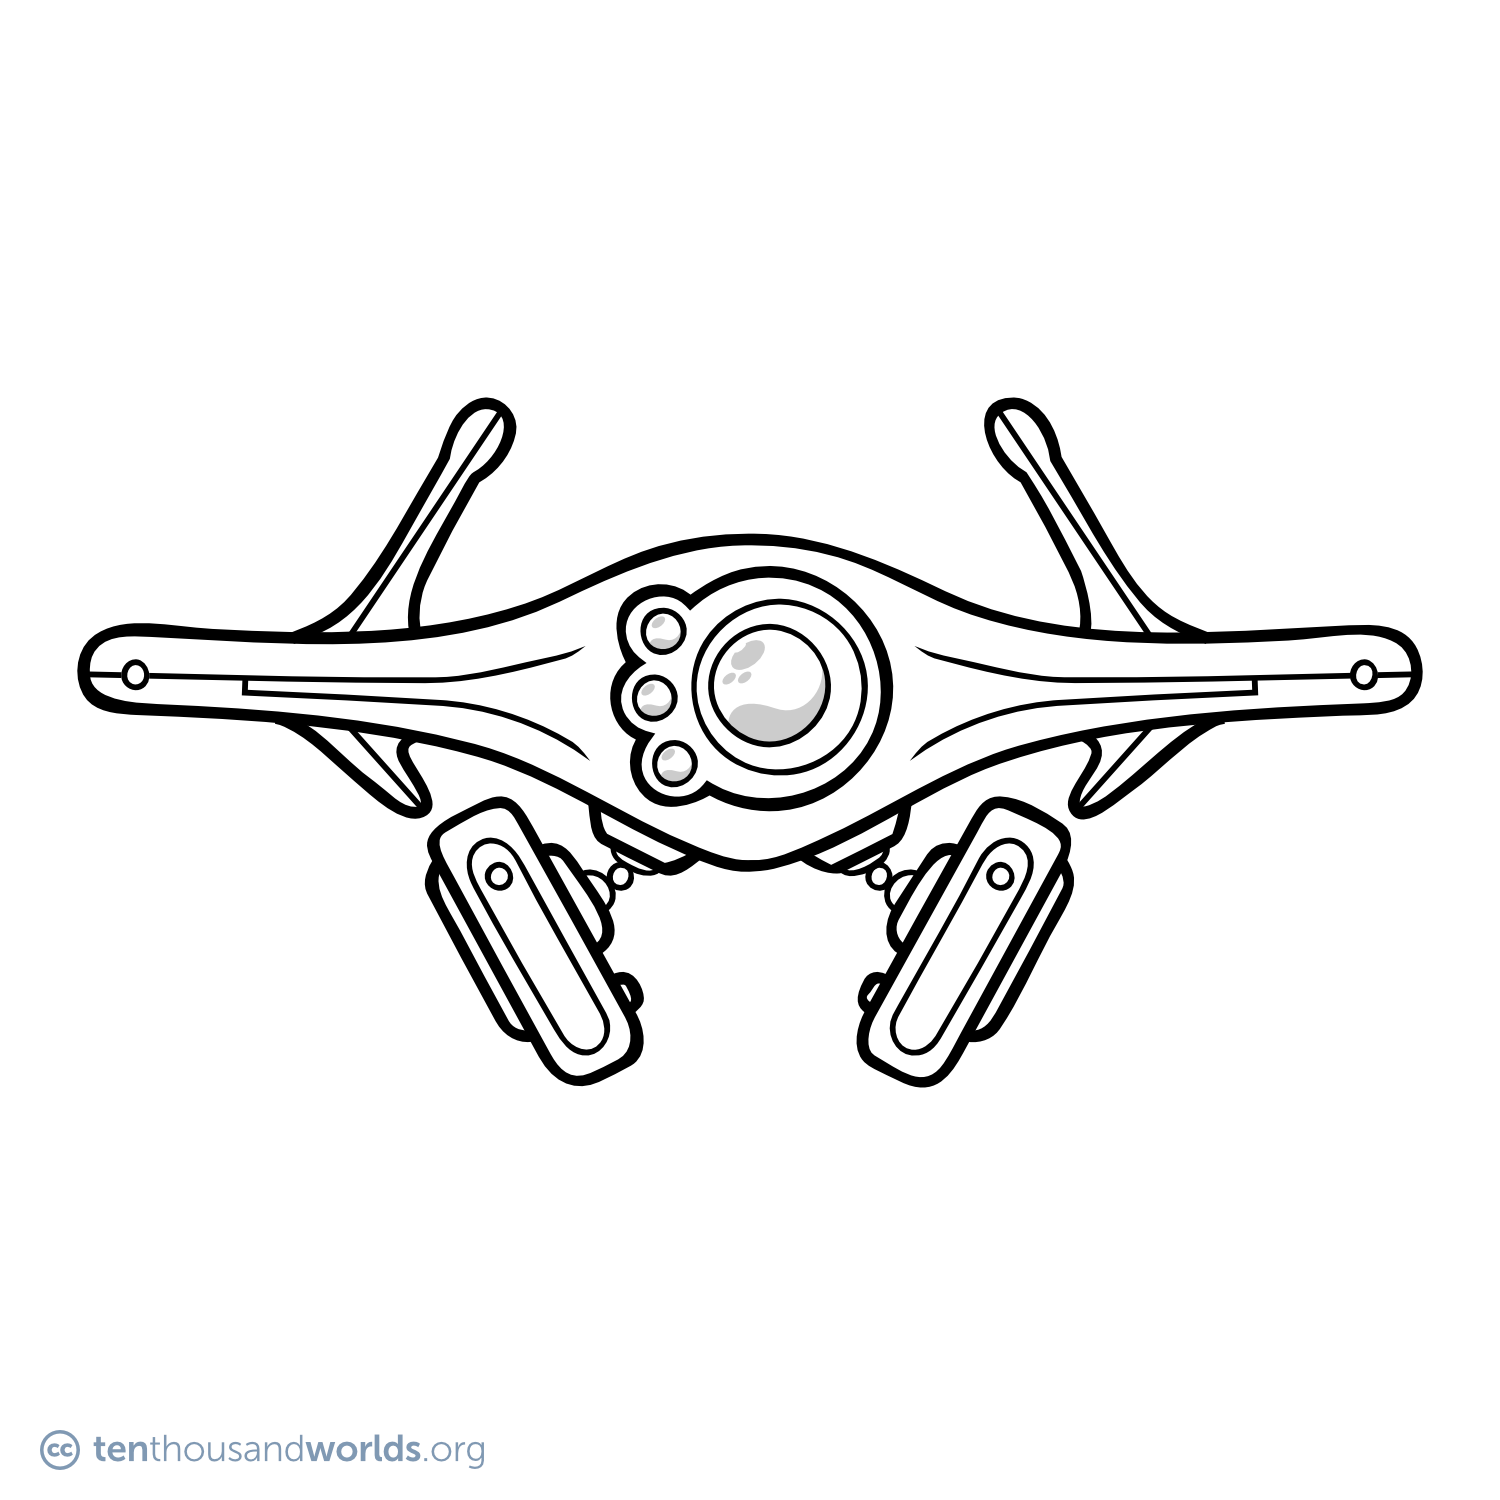 An ink outline of a flying delta-wing-shaped robot seen edge-on, from the front. The center bulges out to hold a cluster of camera eyes. Halfway along each side, a short fin projects down while a larger fin projects up. Two rectangular guns are slung under the center of the wing by a pair of articulated arms.